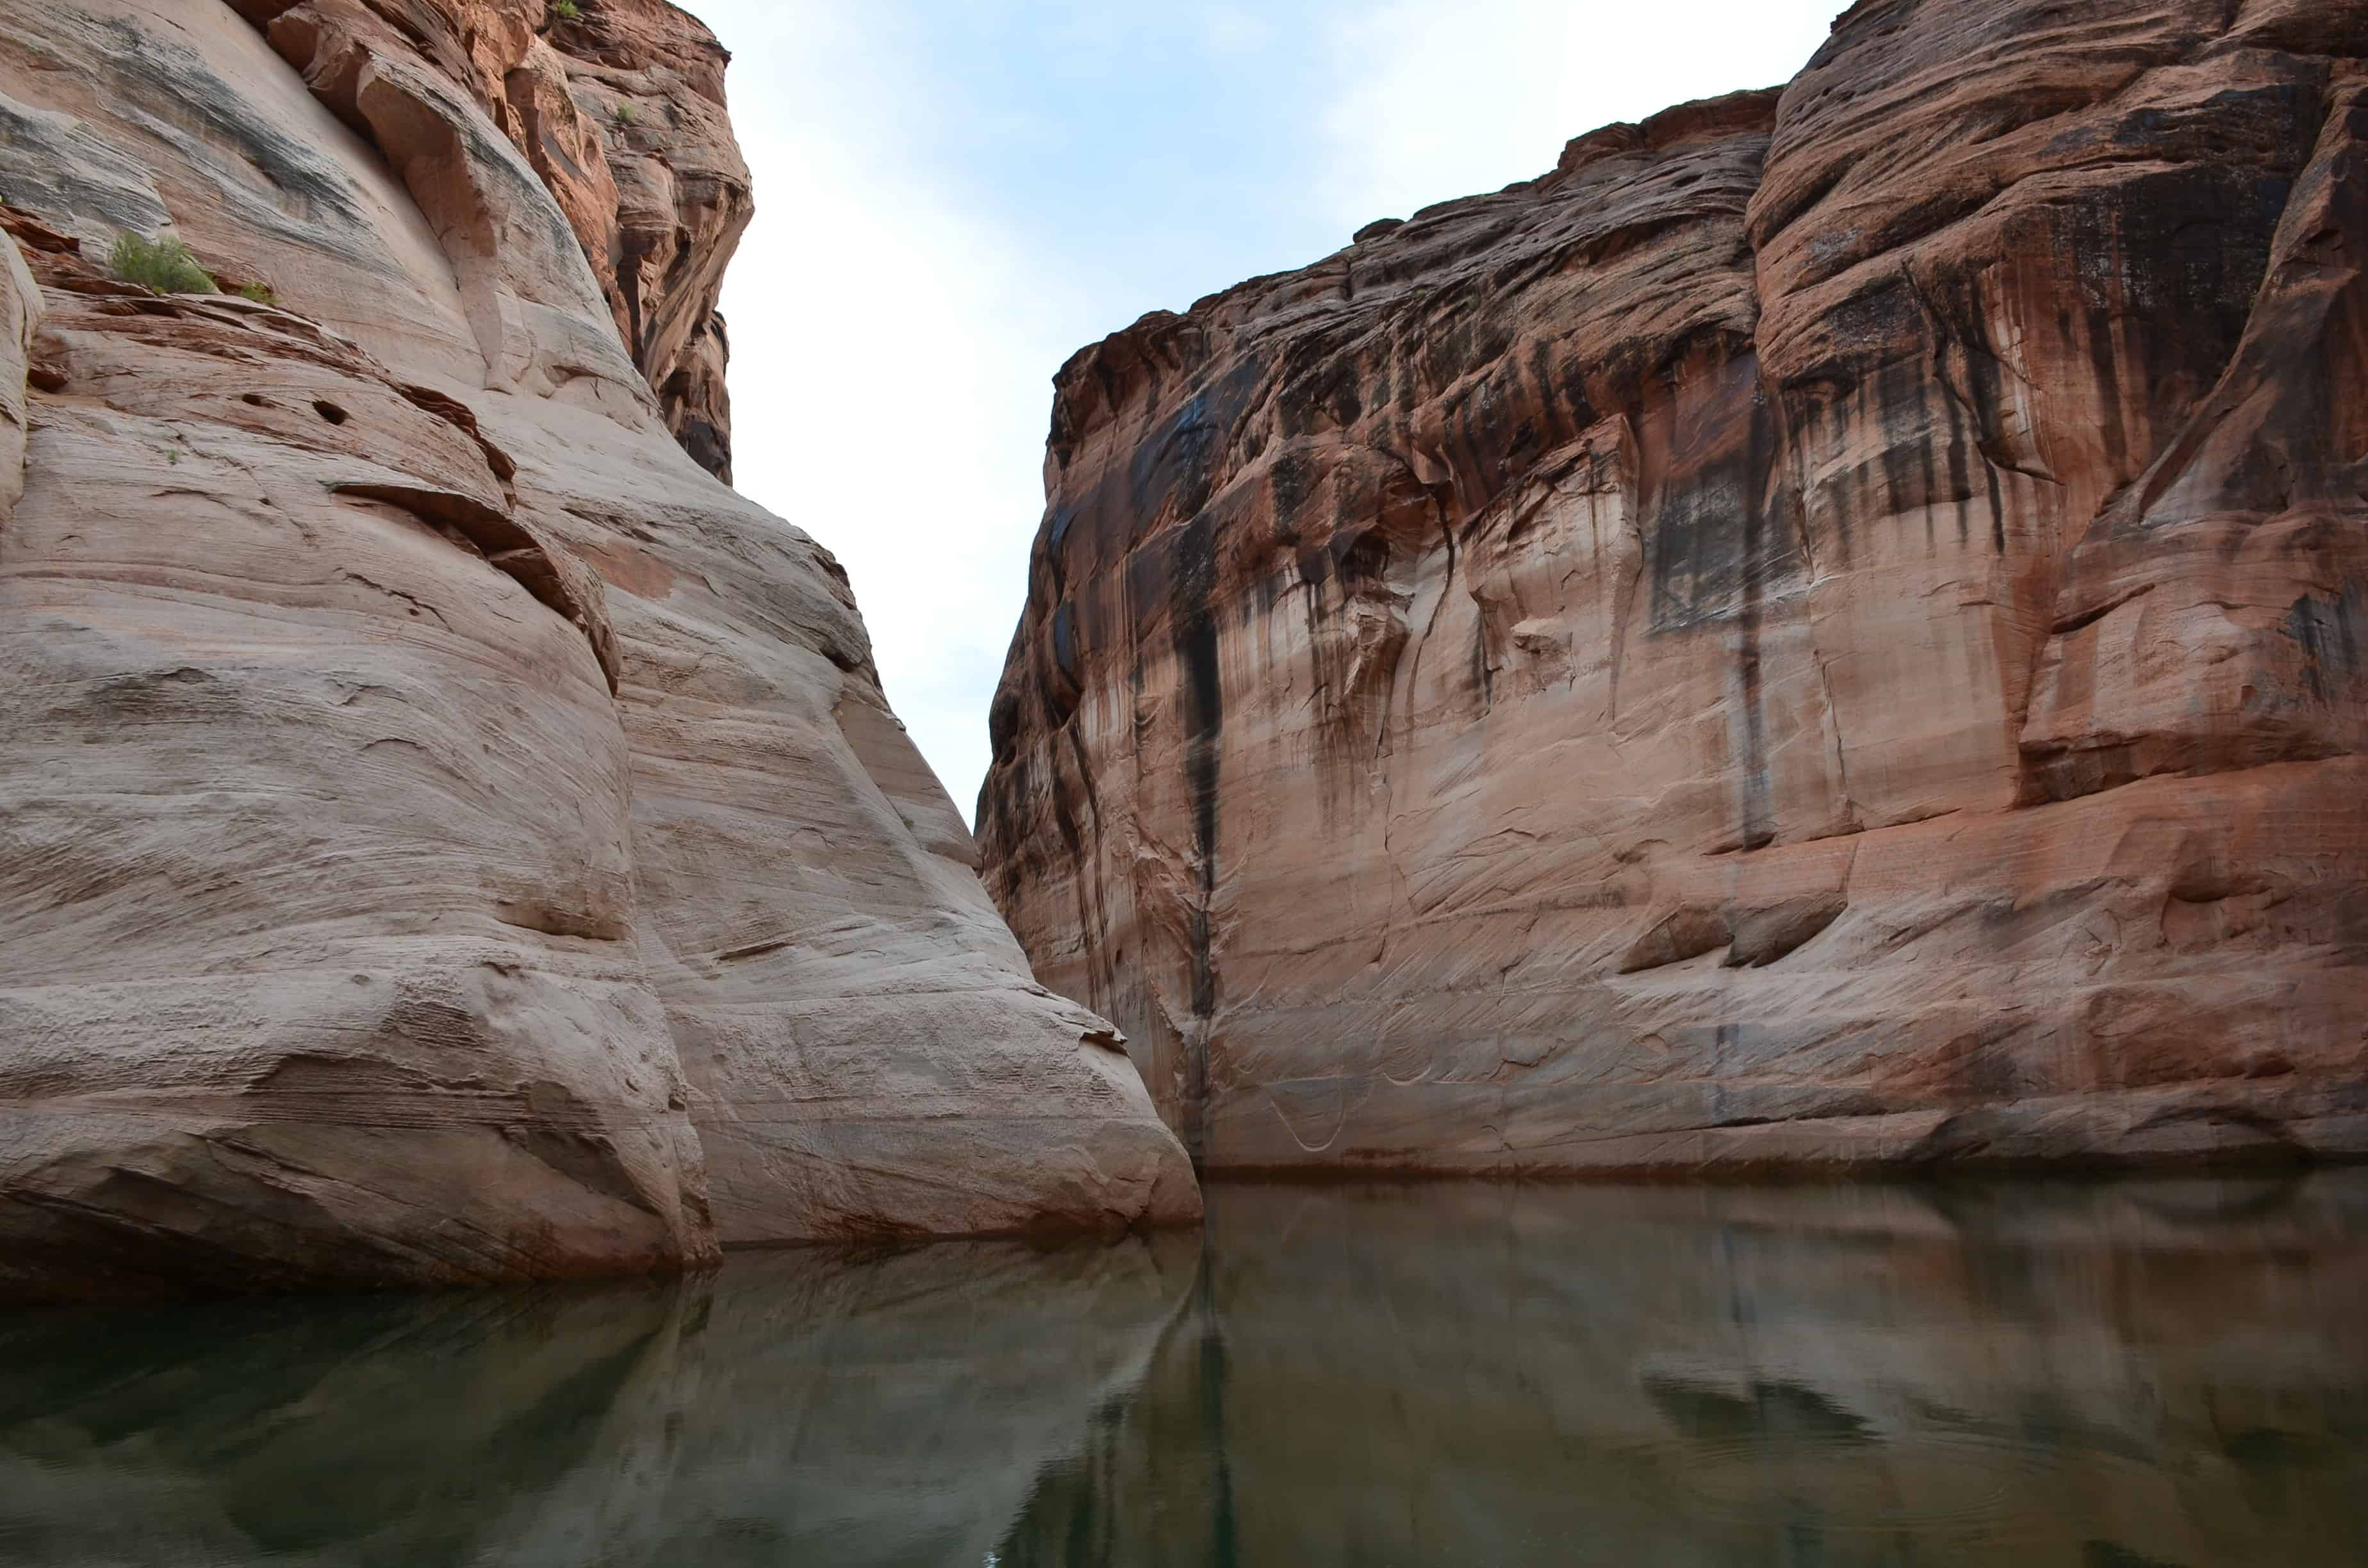 The canyon getting narrower at Antelope Canyon on Lake Powell at Glen Canyon National Recreation Area in Arizona